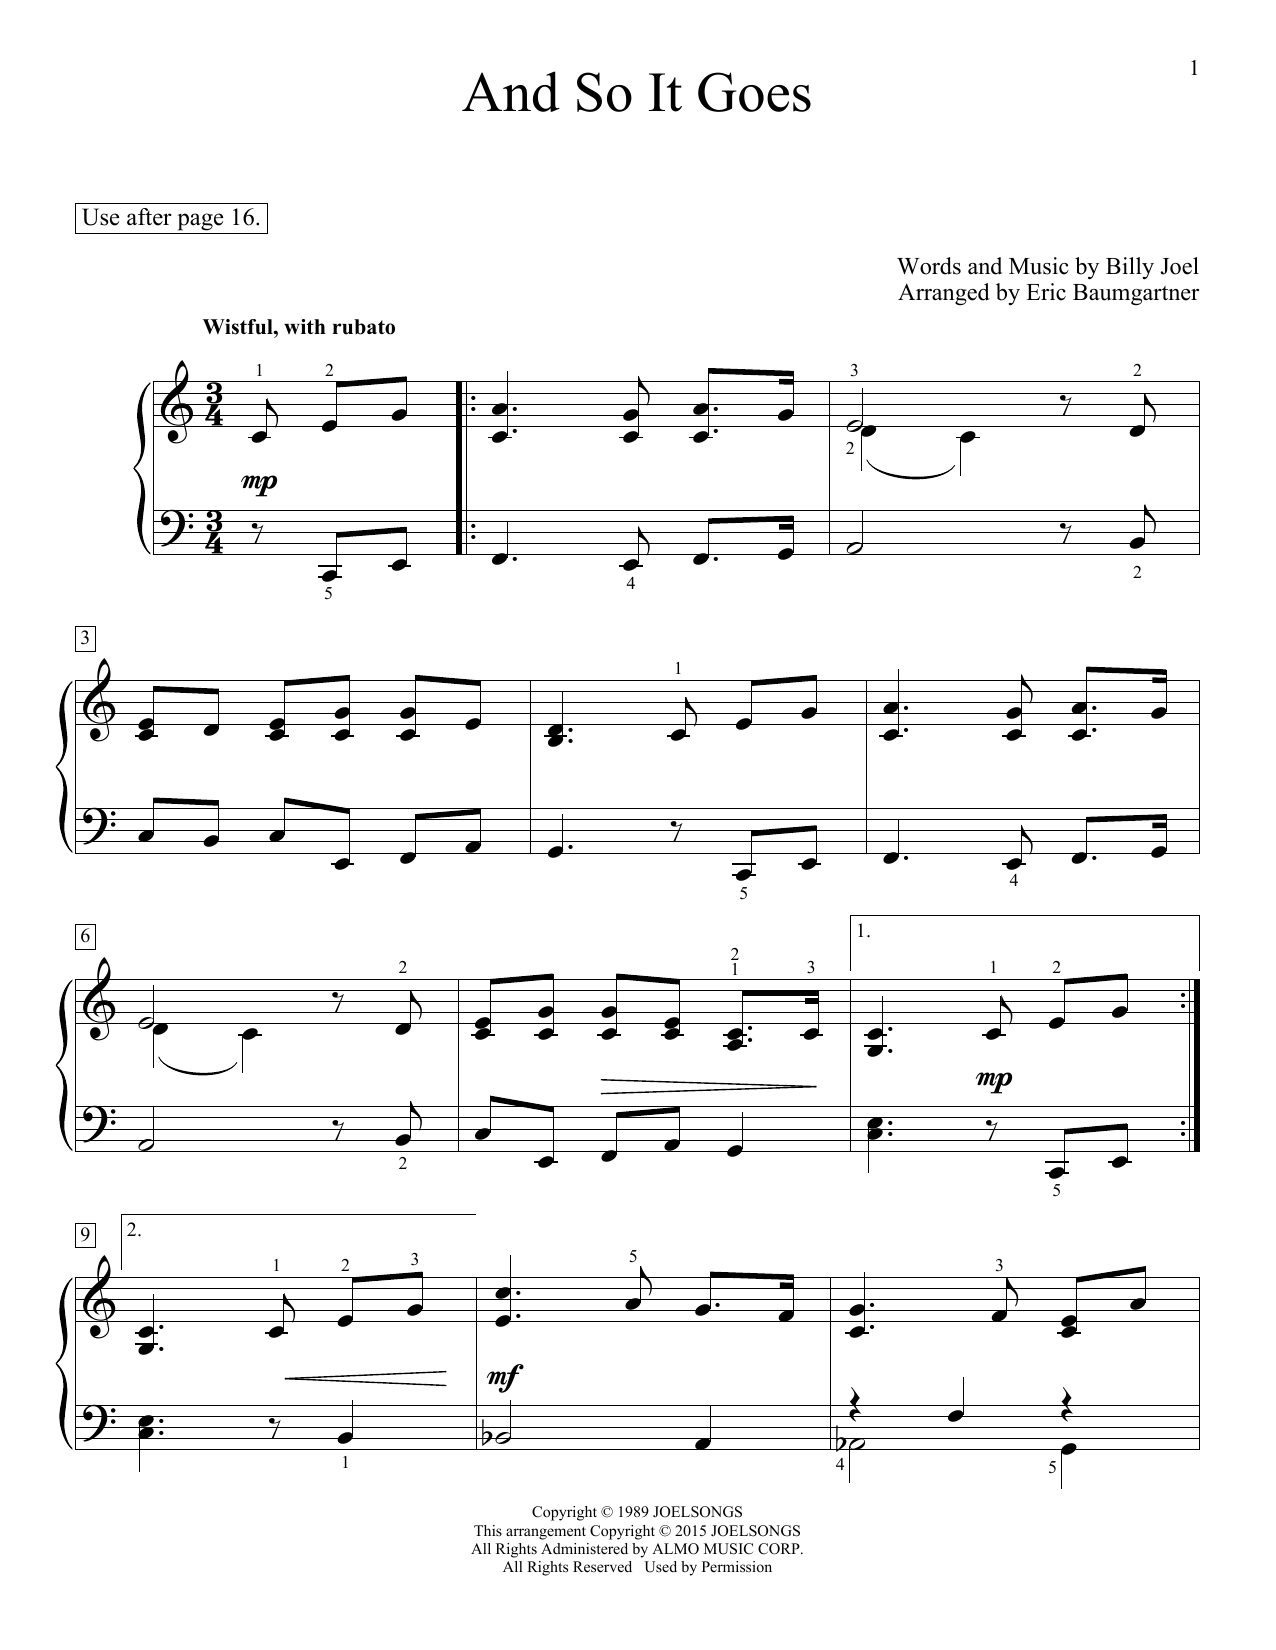 Eric Baumgartner And So It Goes sheet music notes and chords. Download Printable PDF.